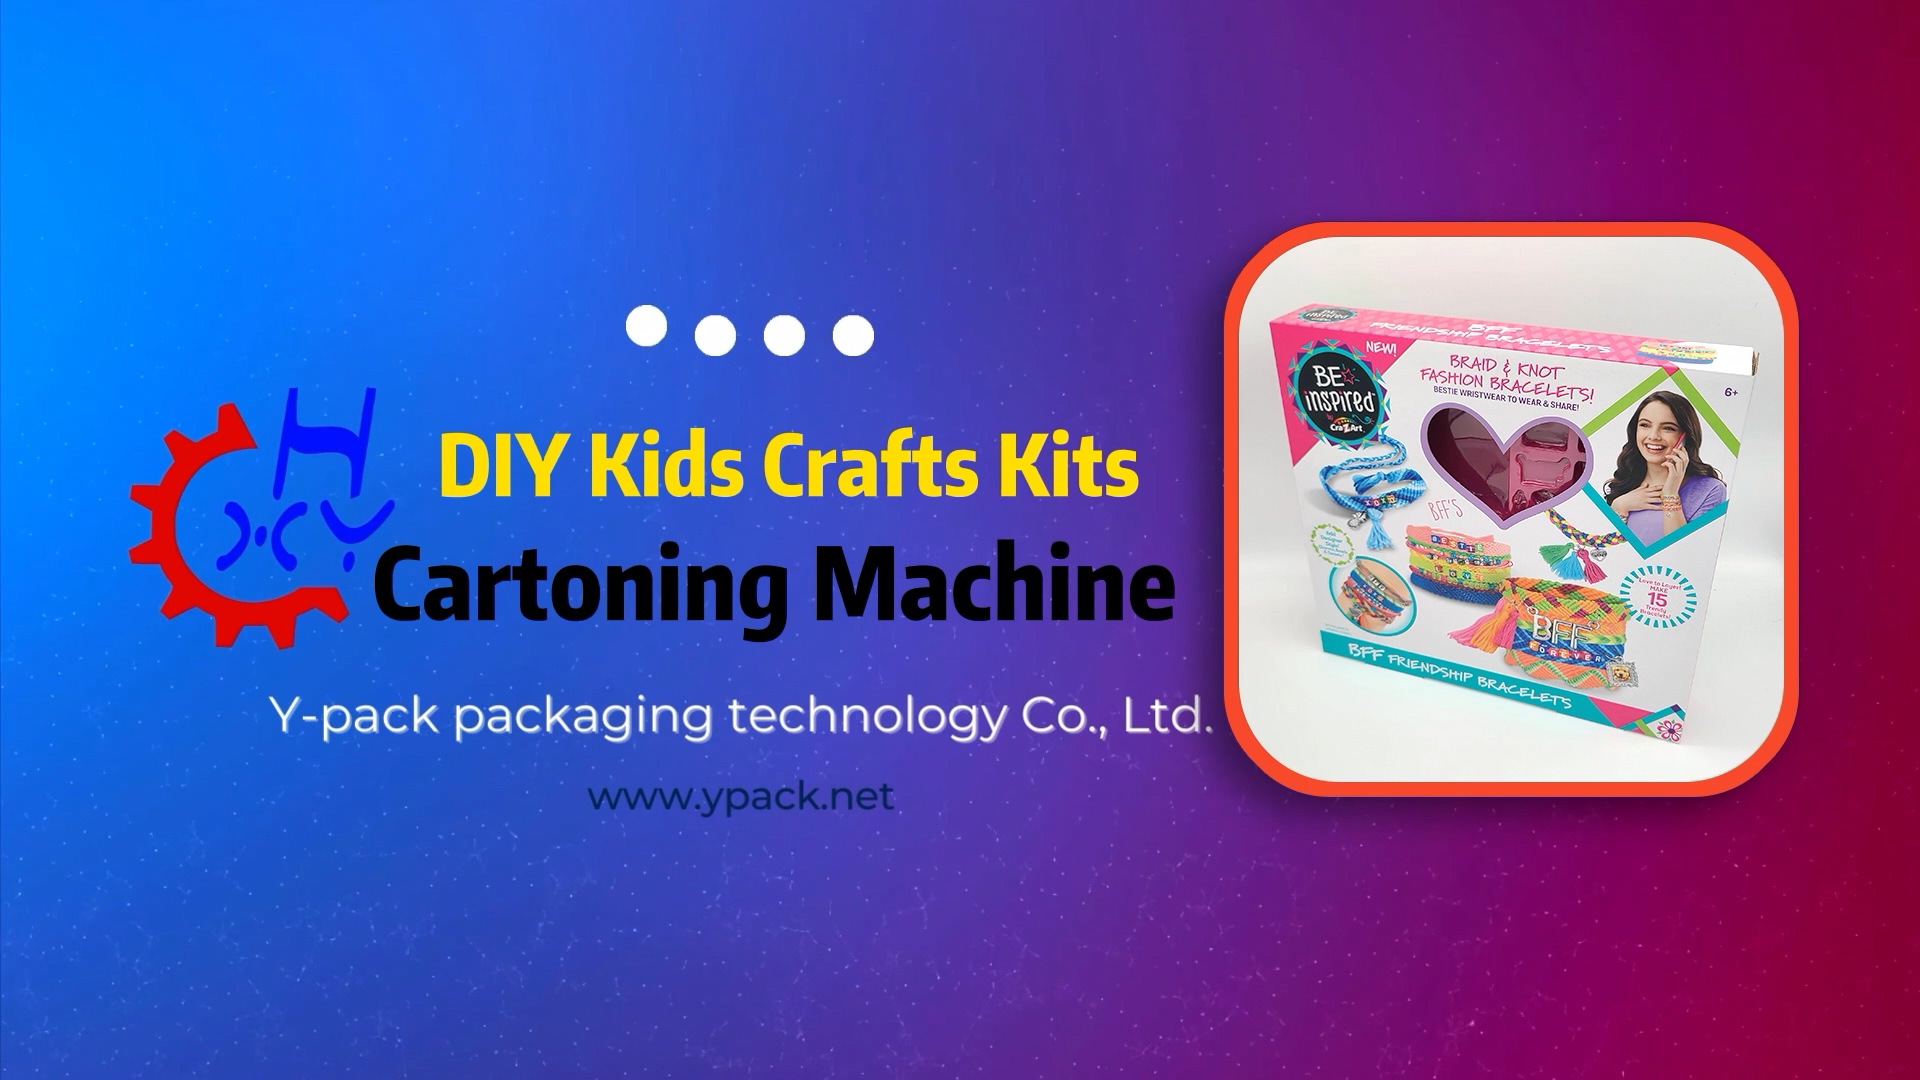 What is The Best Way to Pack a Box or a Carton for a DIY Kids Craft Kit?Cartoner|Cartoning Machine